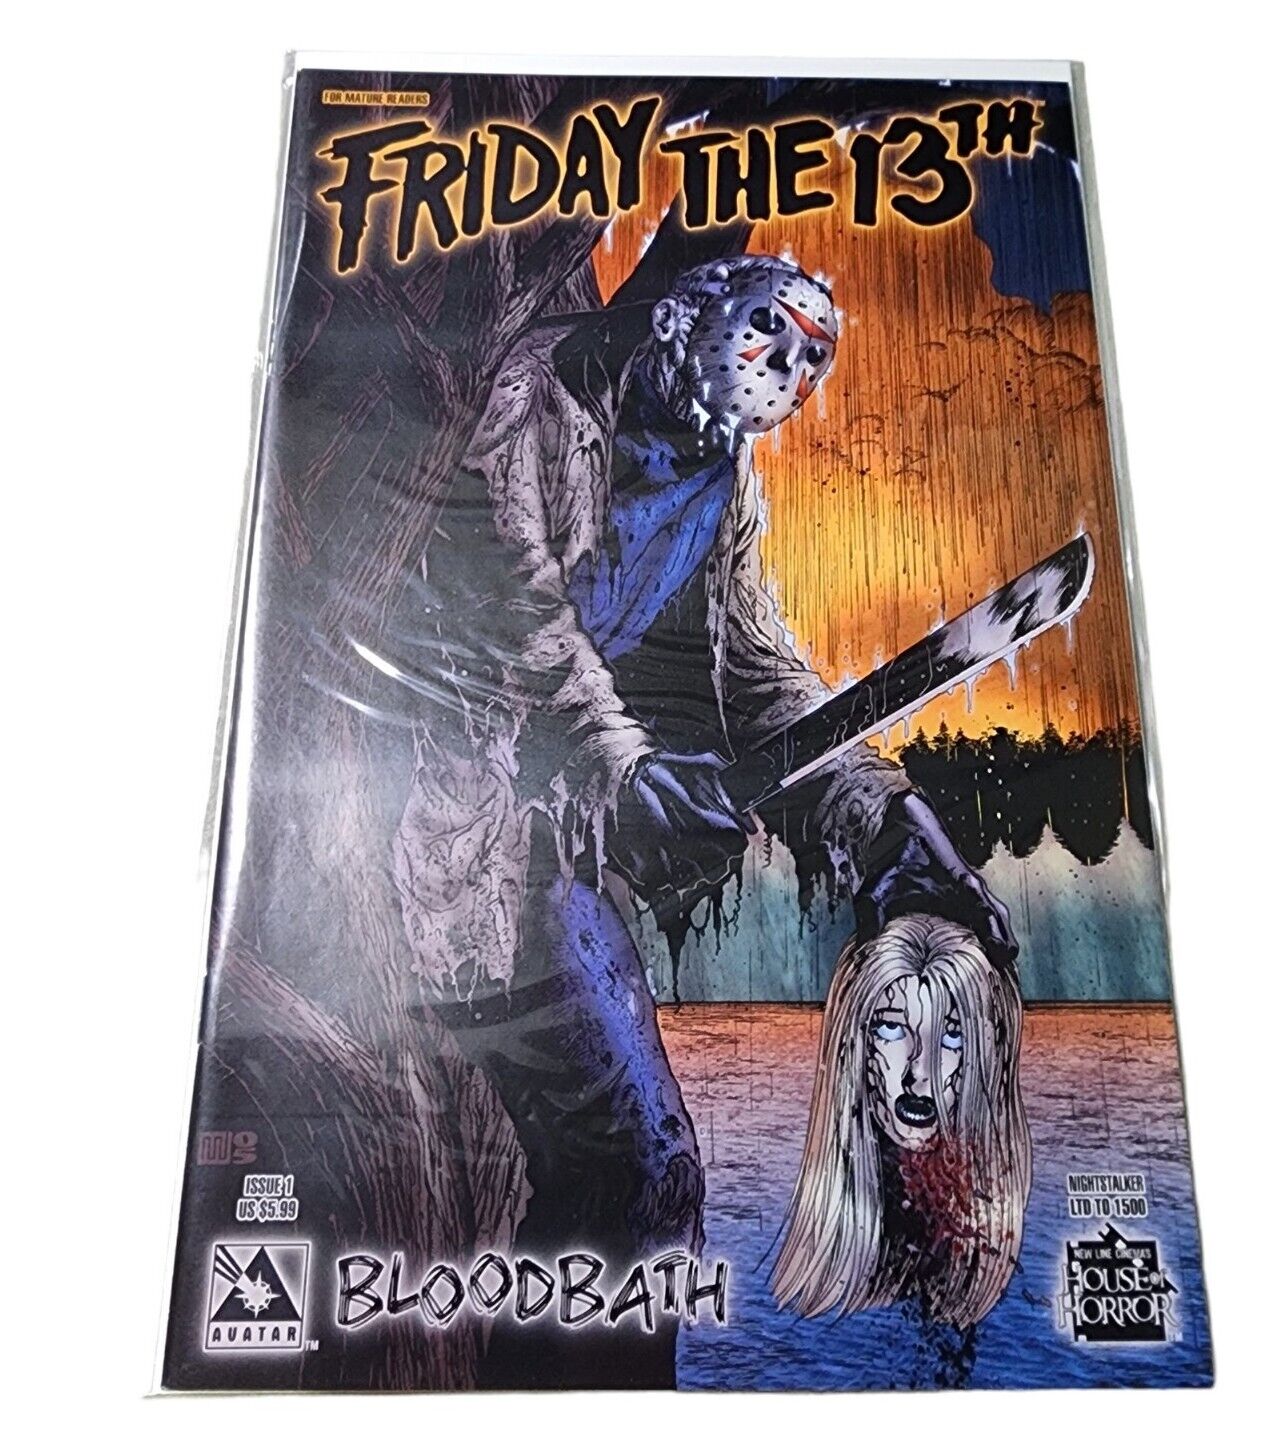 FRIDAY THE 13TH BLOODBATH #1 NIGHTSTALKER COVER LIMITED TO 1500